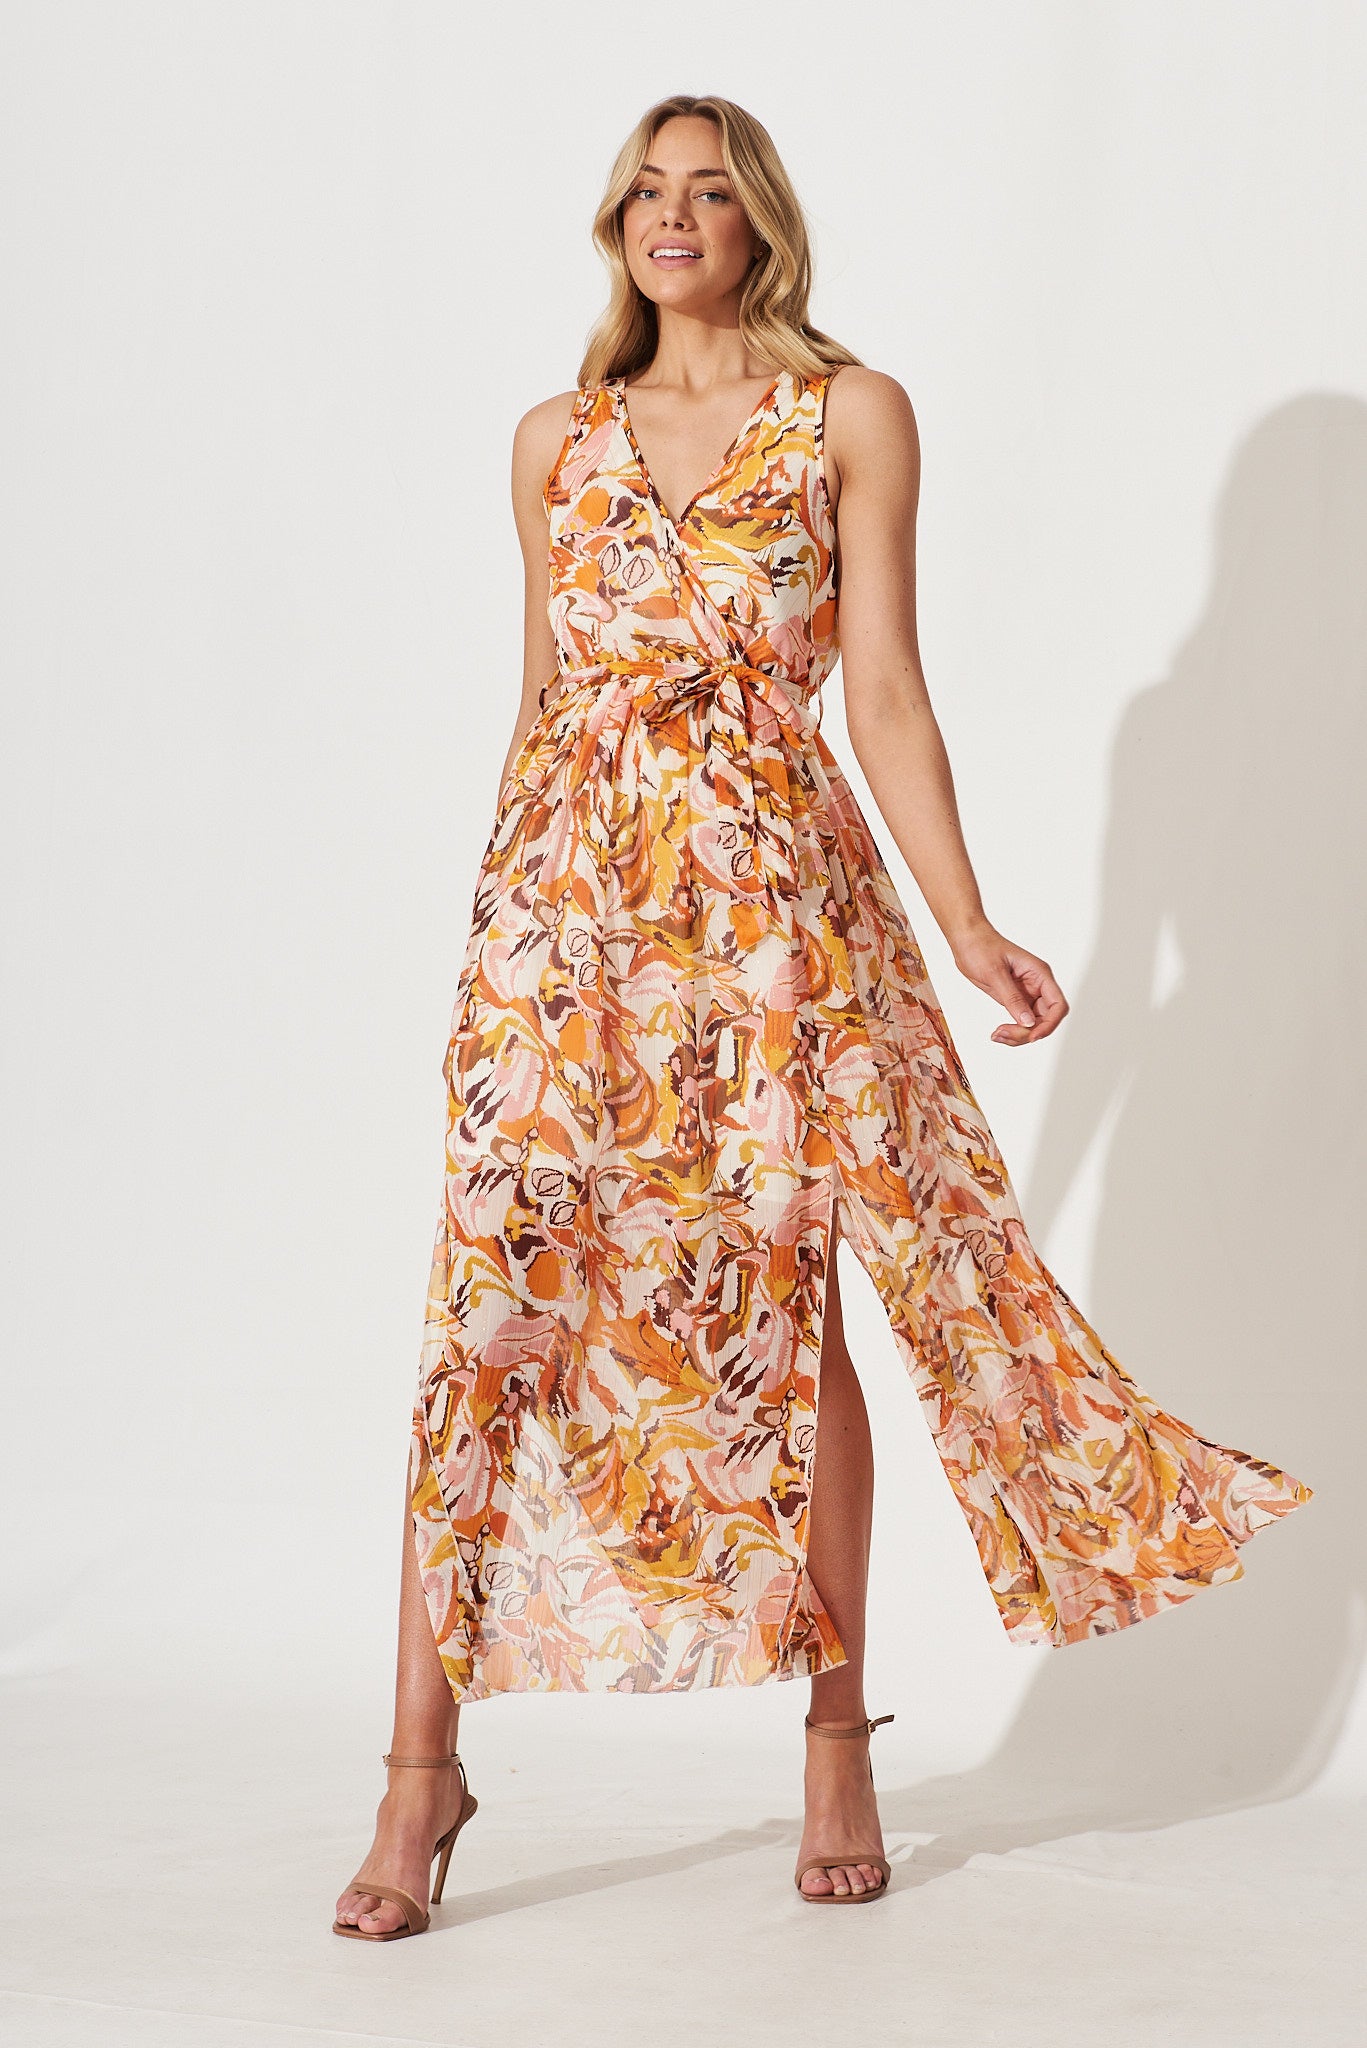 Temptation Maxi Dress In Tangerine Multi Floral Print With Lurex - full length